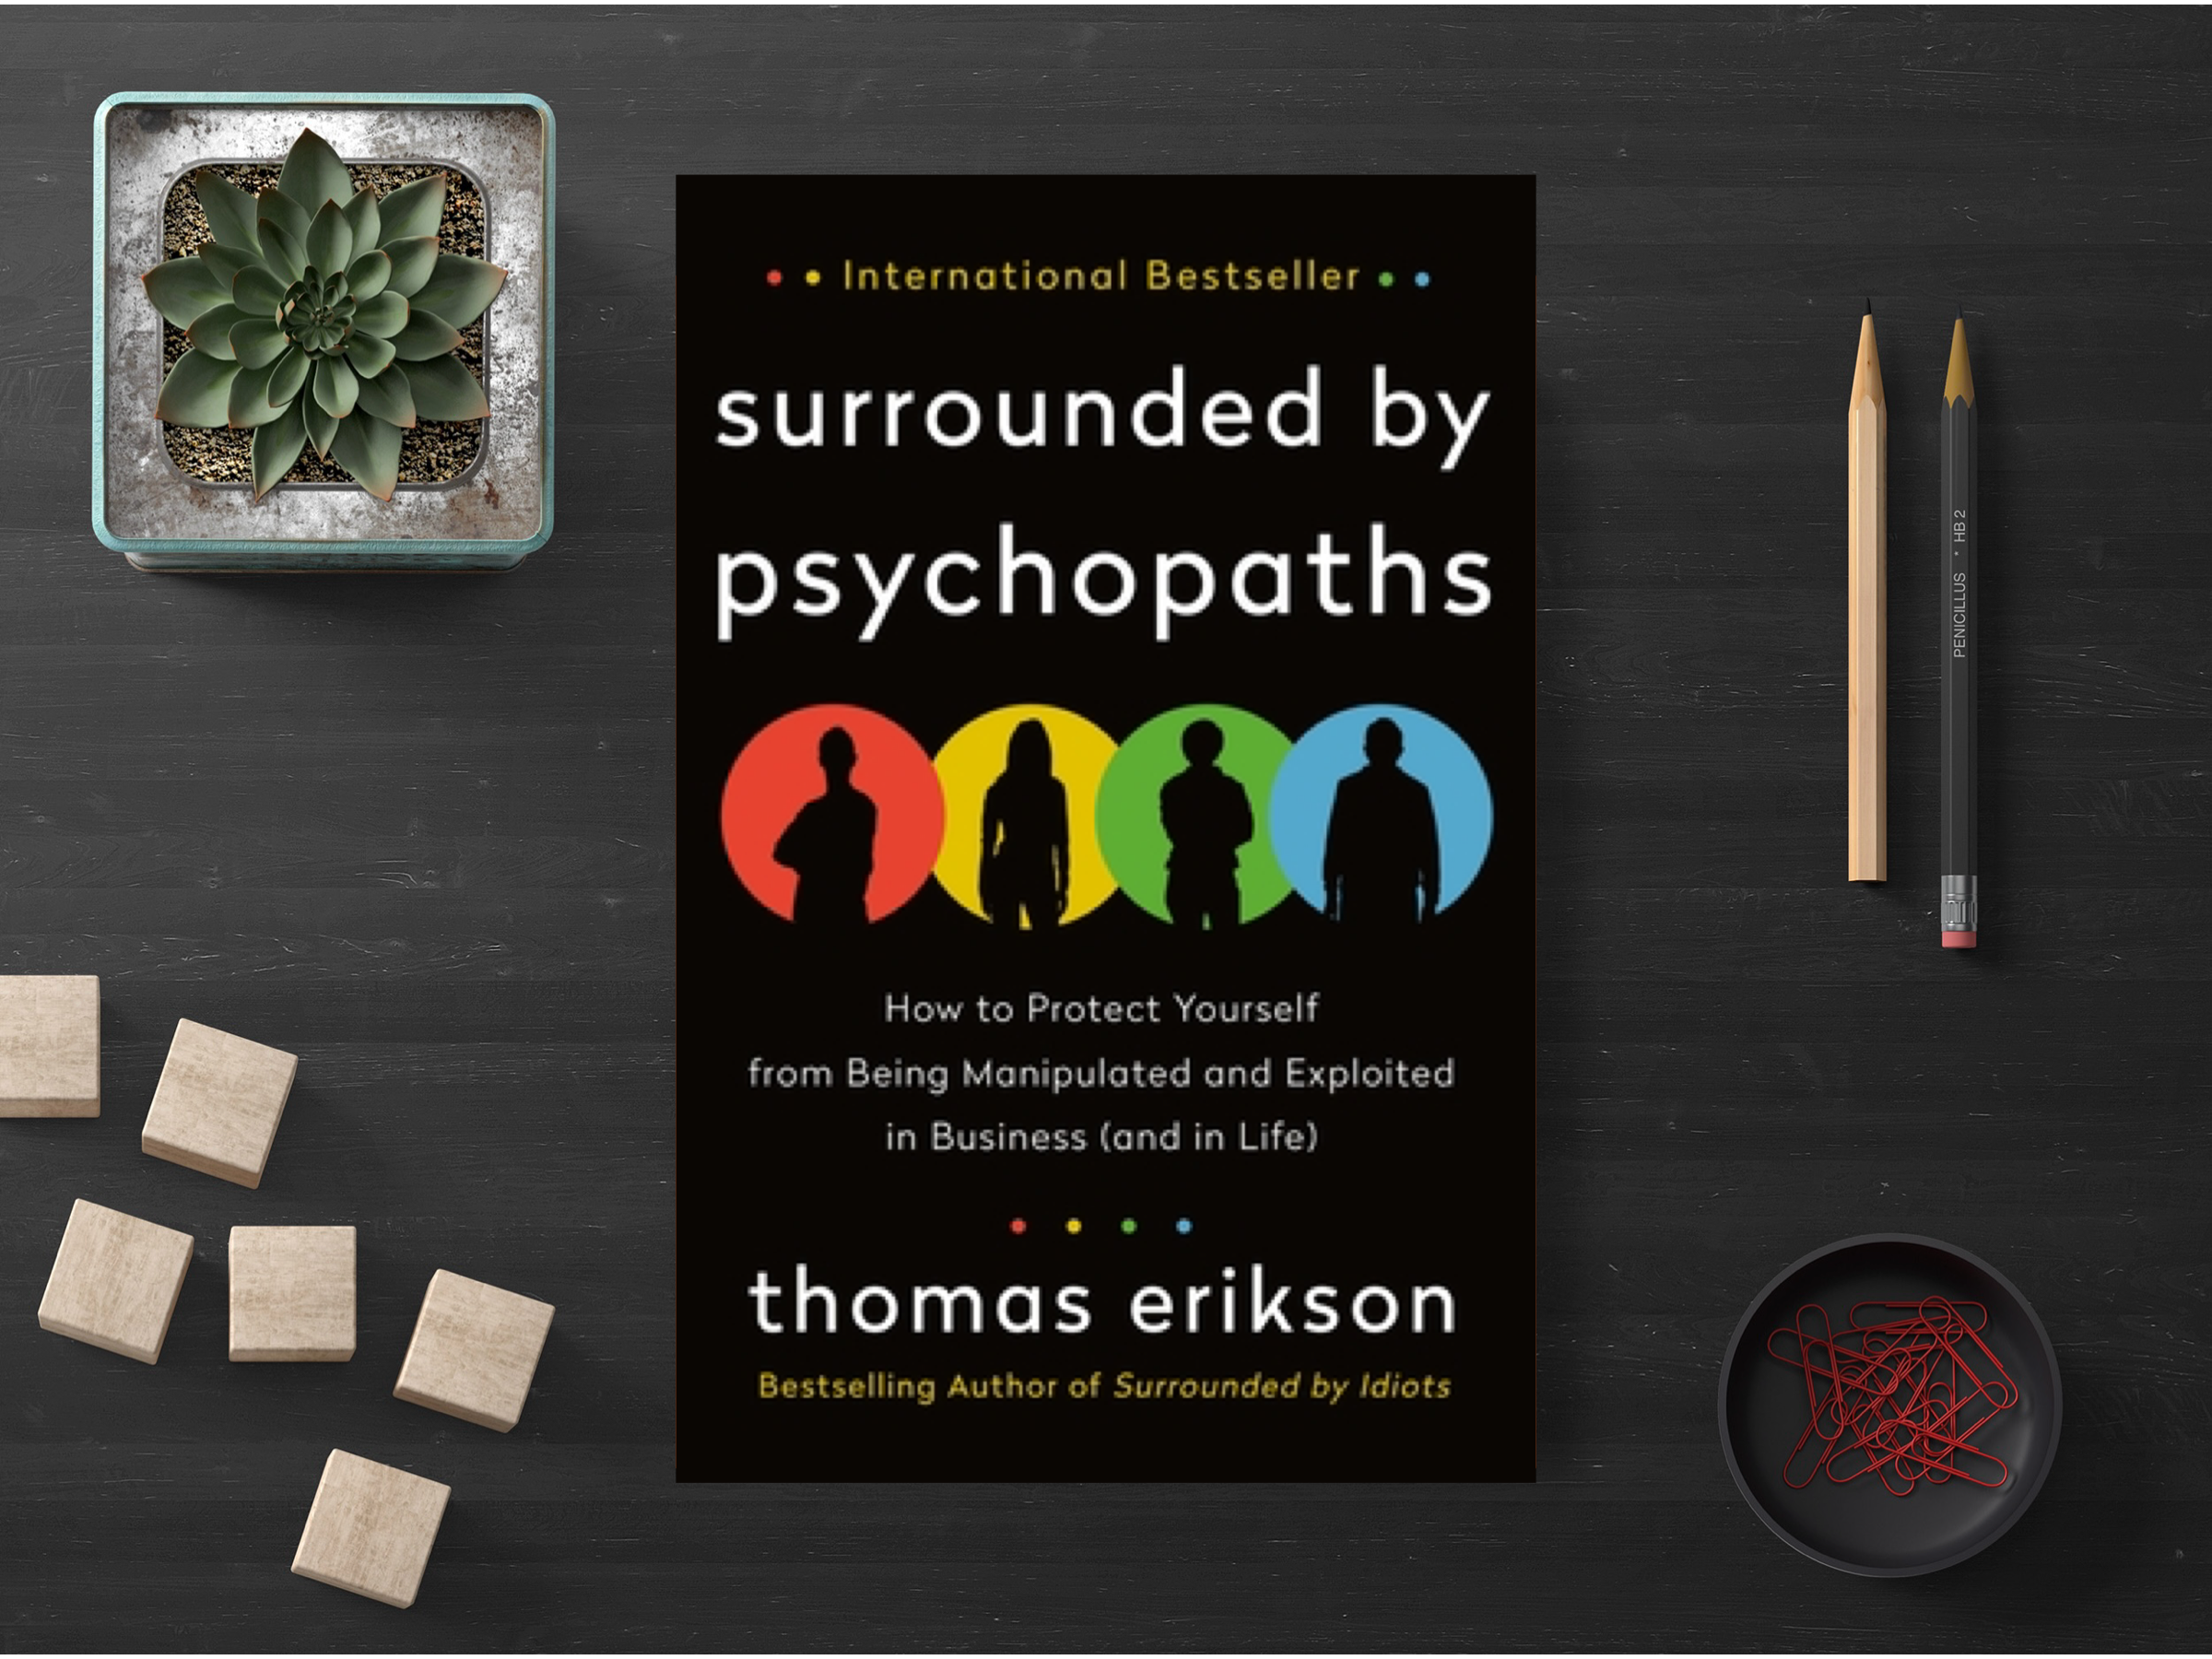 The Surrounded by Idiots Series: Surrounded by Psychopaths : How to Protect  Yourself from Being Manipulated and Exploited in Business (and in Life)  [The Surrounded by Idiots Series] (Paperback) 